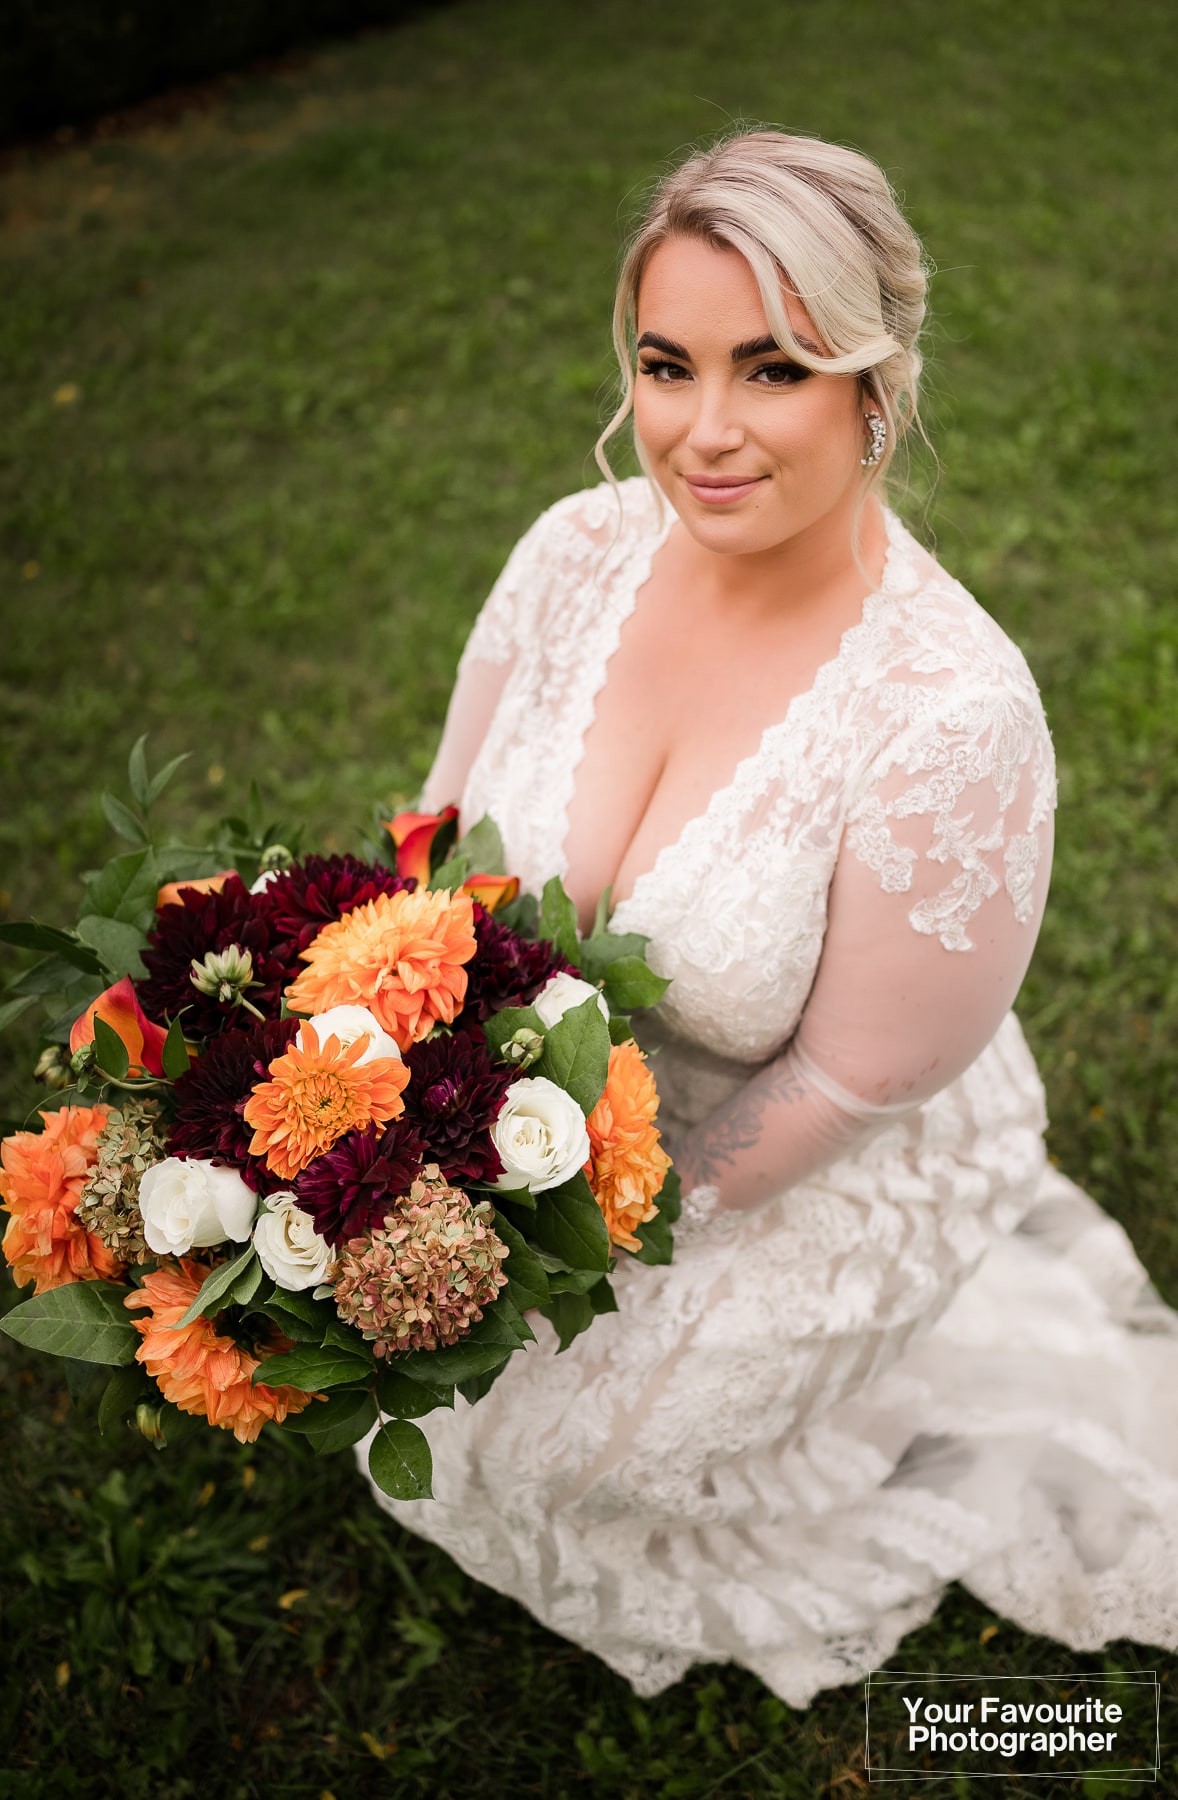 Bride posing with flowers